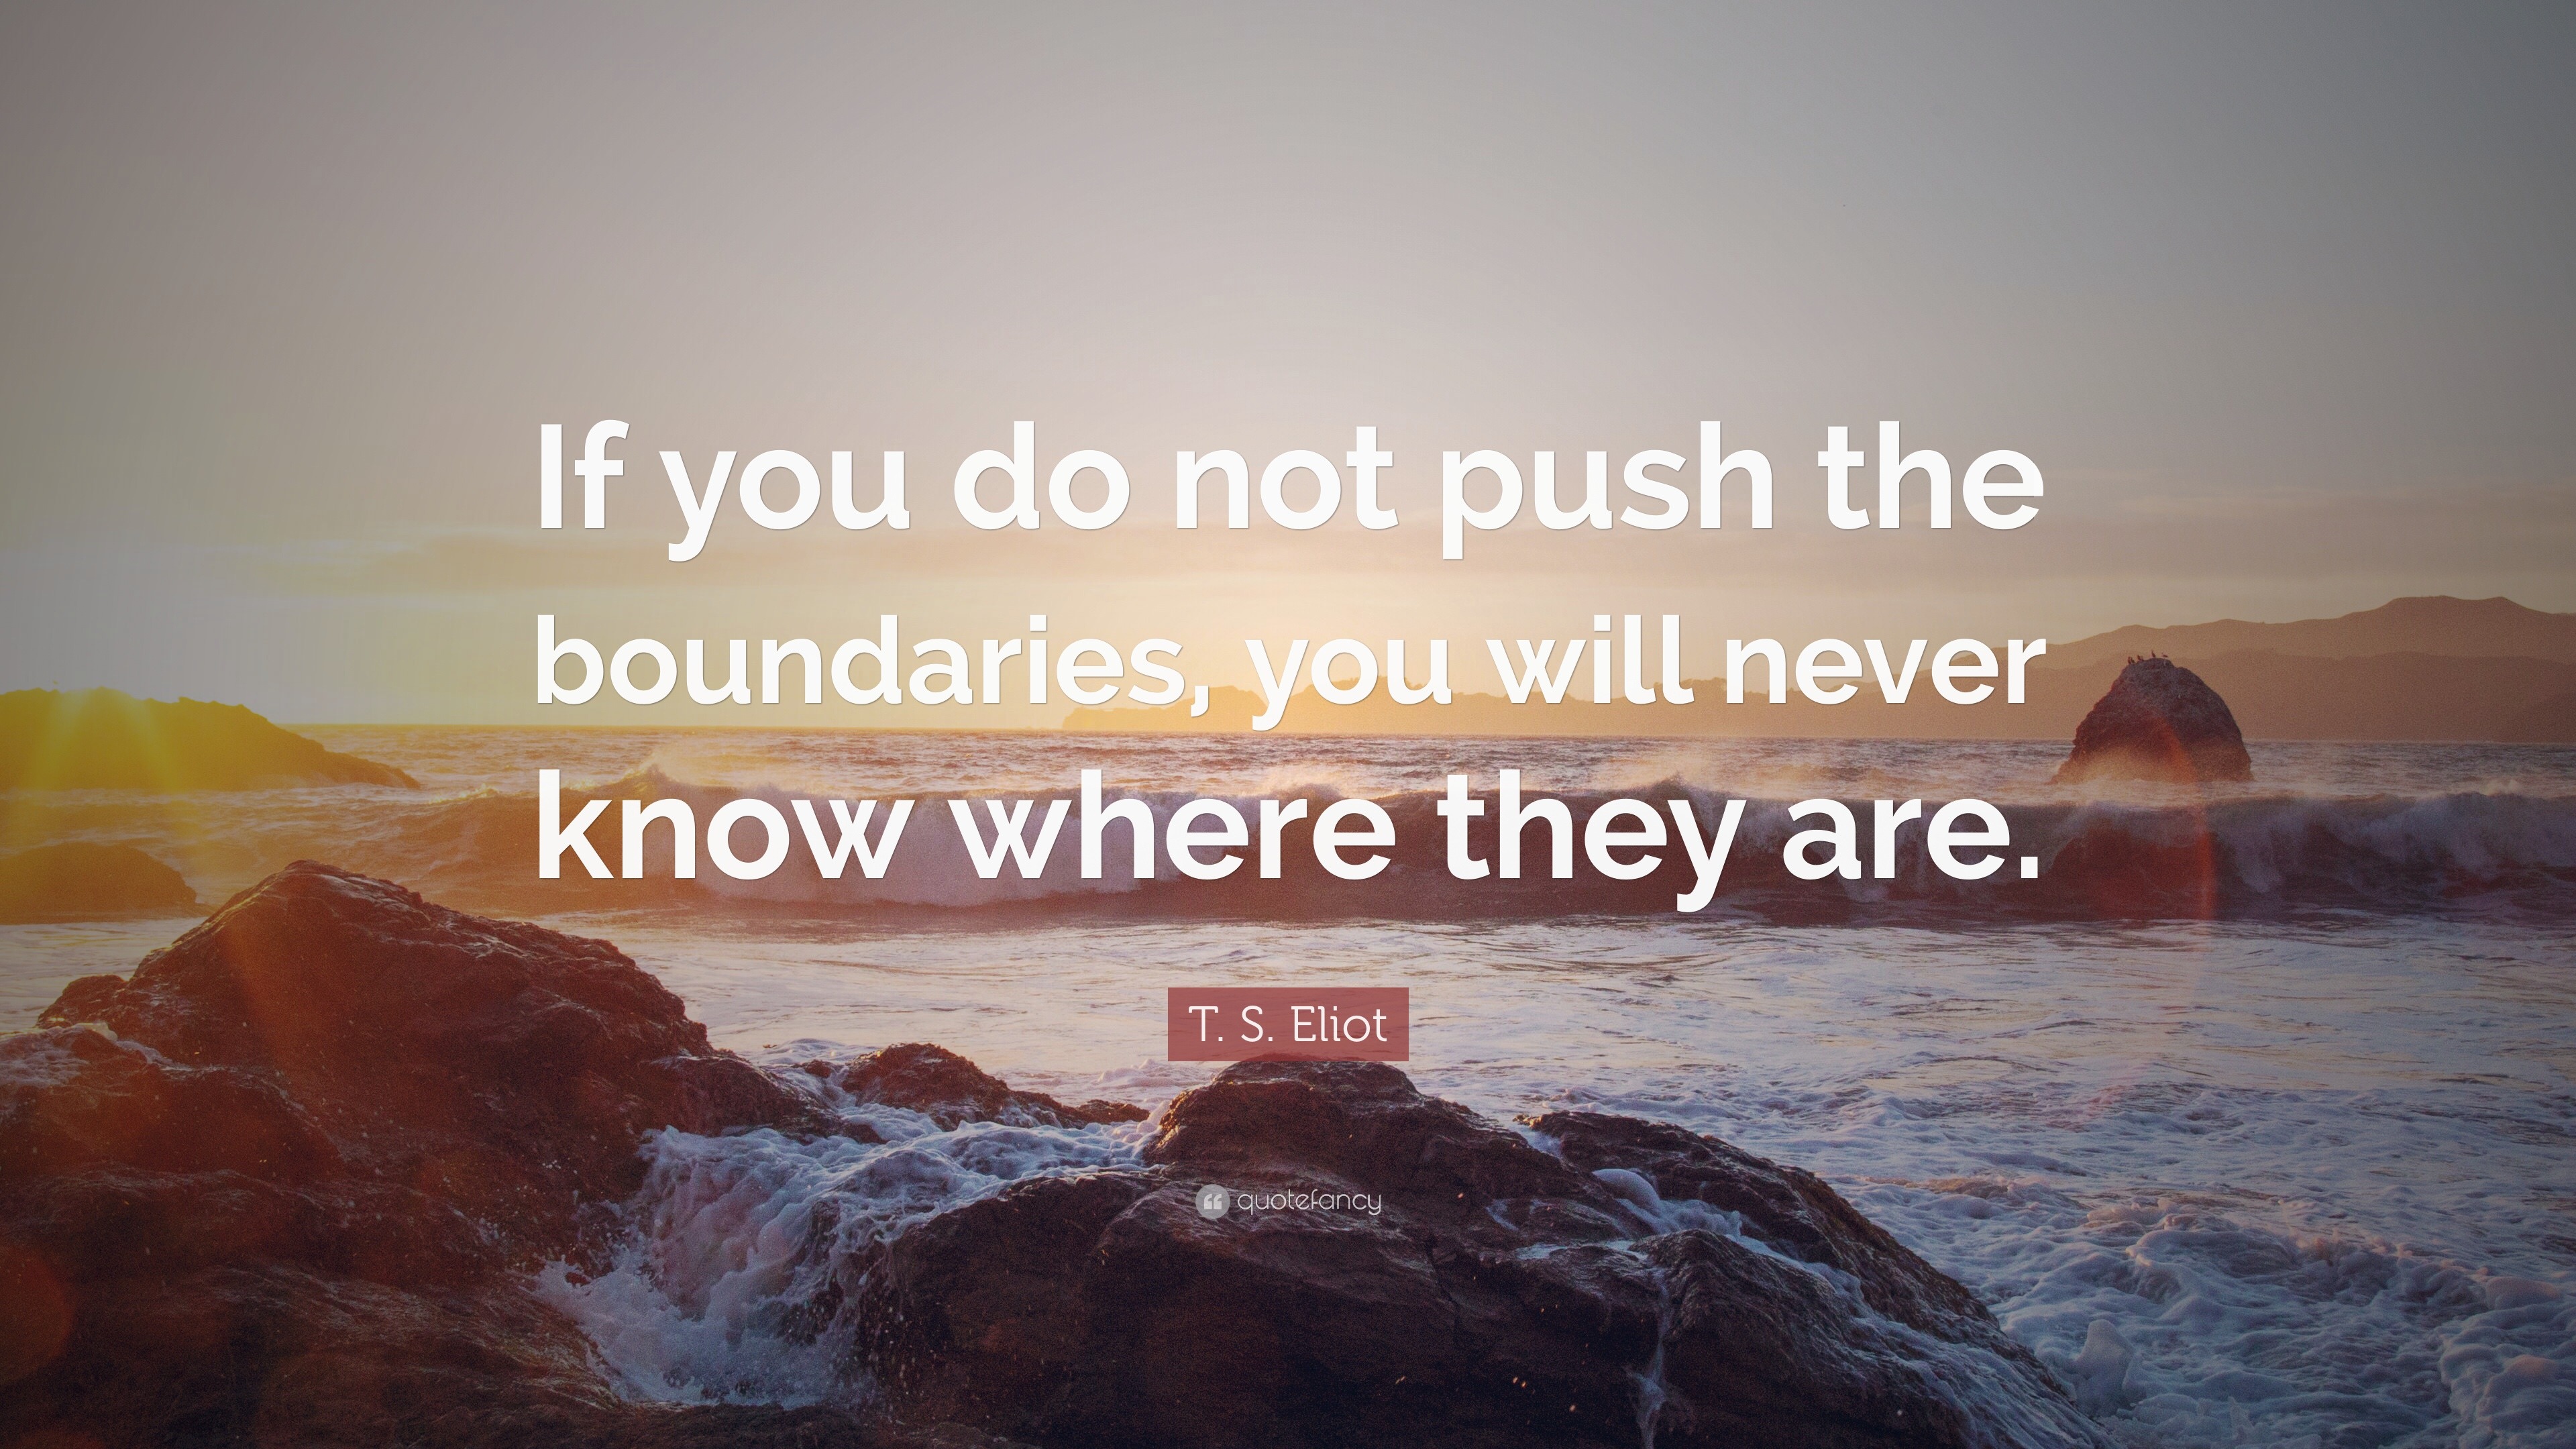 If you do not push the boundaries, you will never know where they are. 